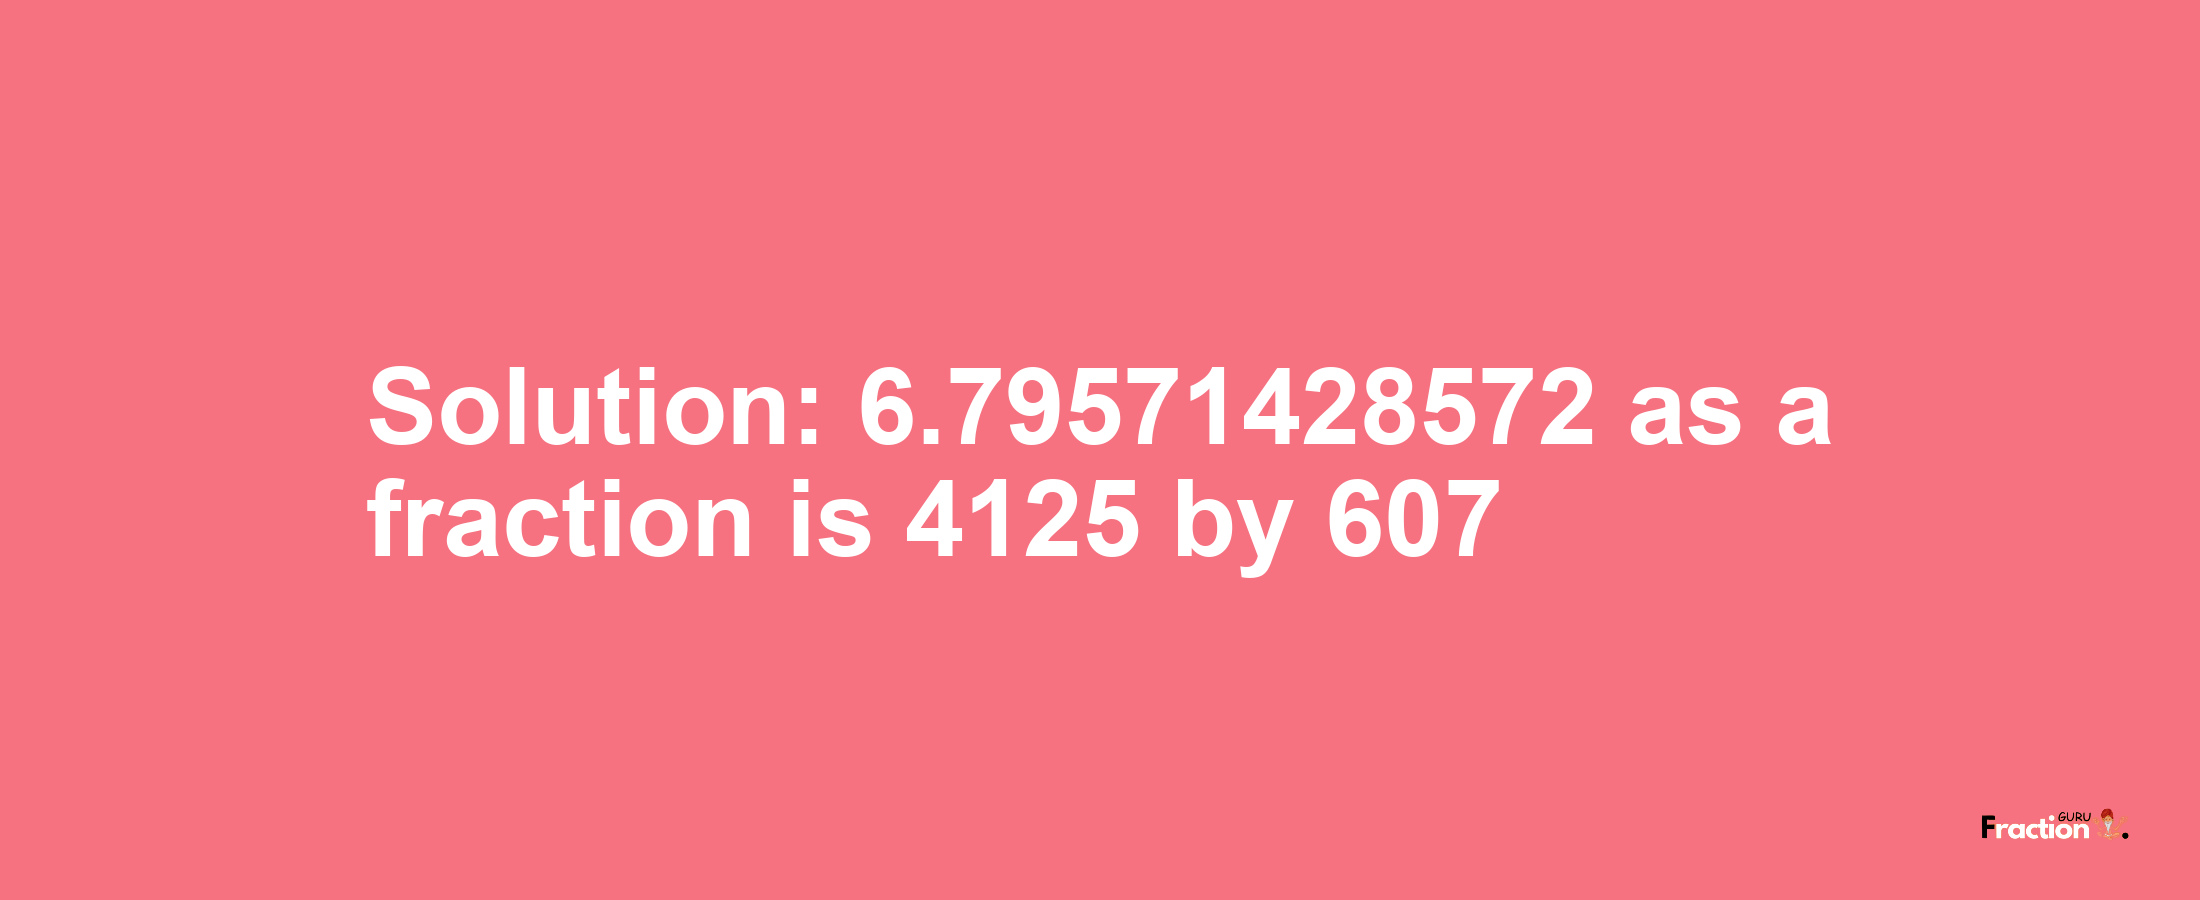 Solution:6.79571428572 as a fraction is 4125/607